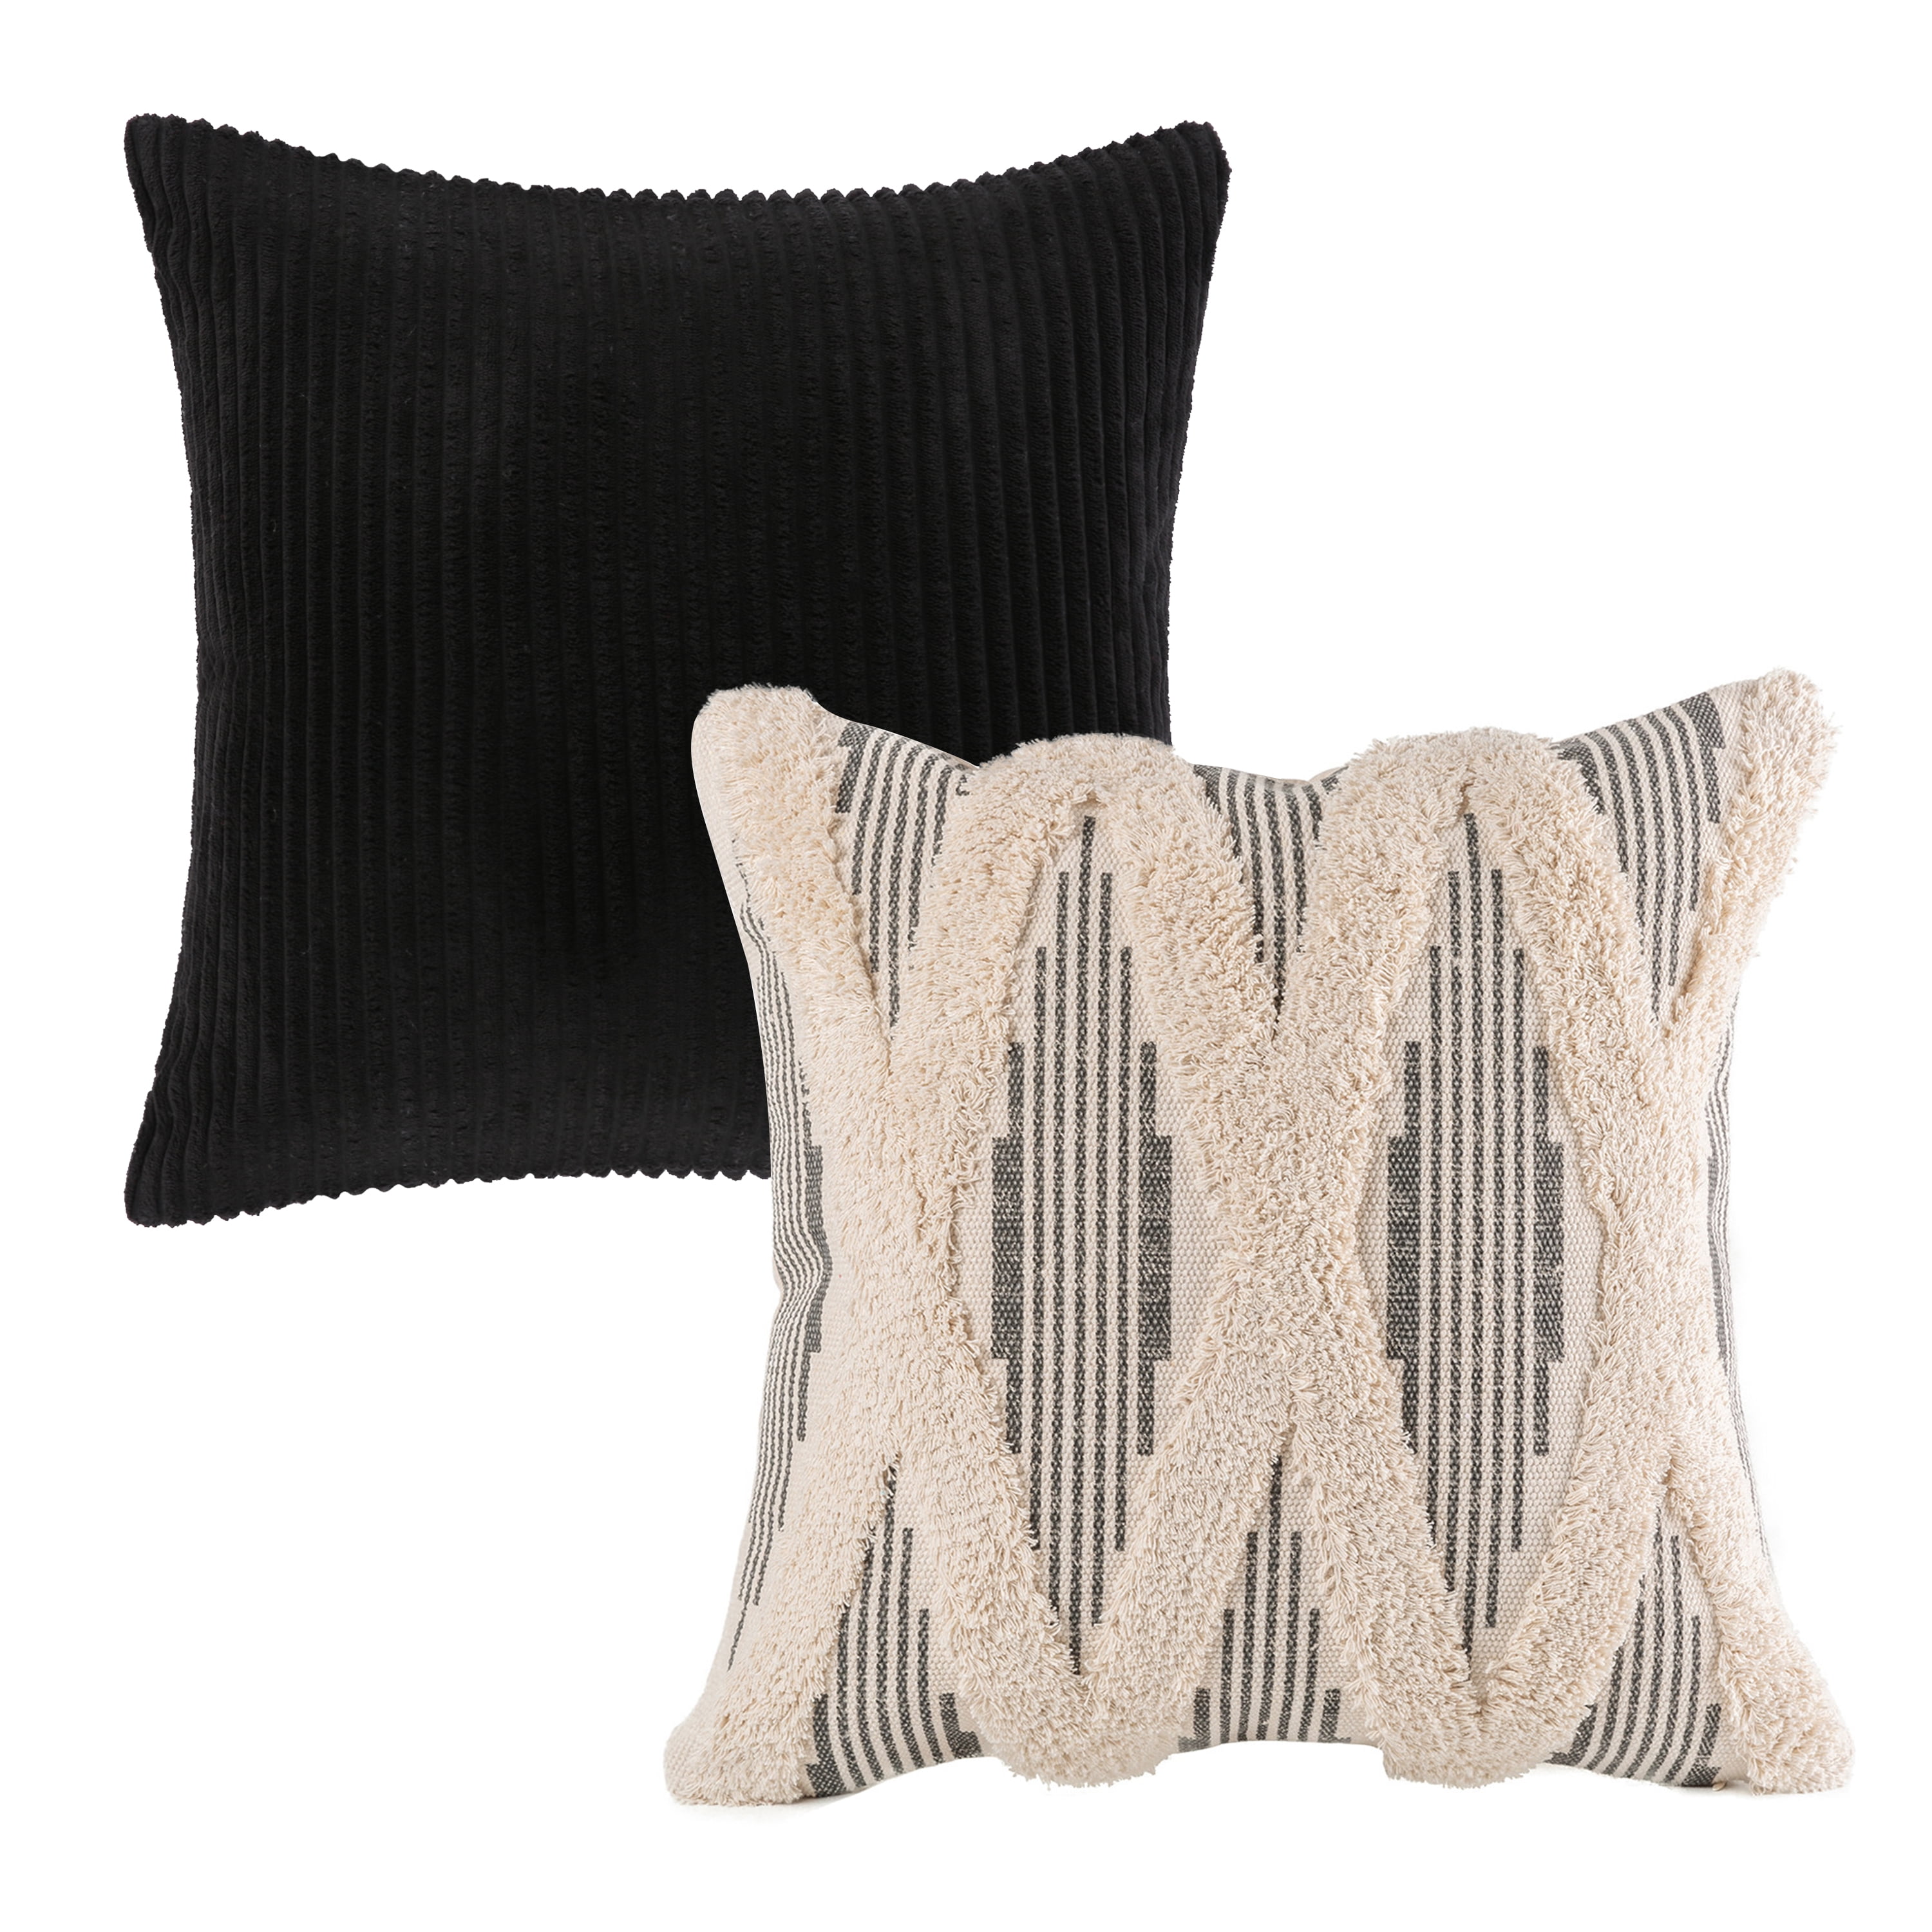 Decorative Throw Pillows Set of 4, Soft Corduroy Striped Velvet & Boho  Woven Cross Tufted Series Cushion Bundles, for Sofa Couch Bedroom, Black &  Gray & Beige, 18 x 18 Inch 